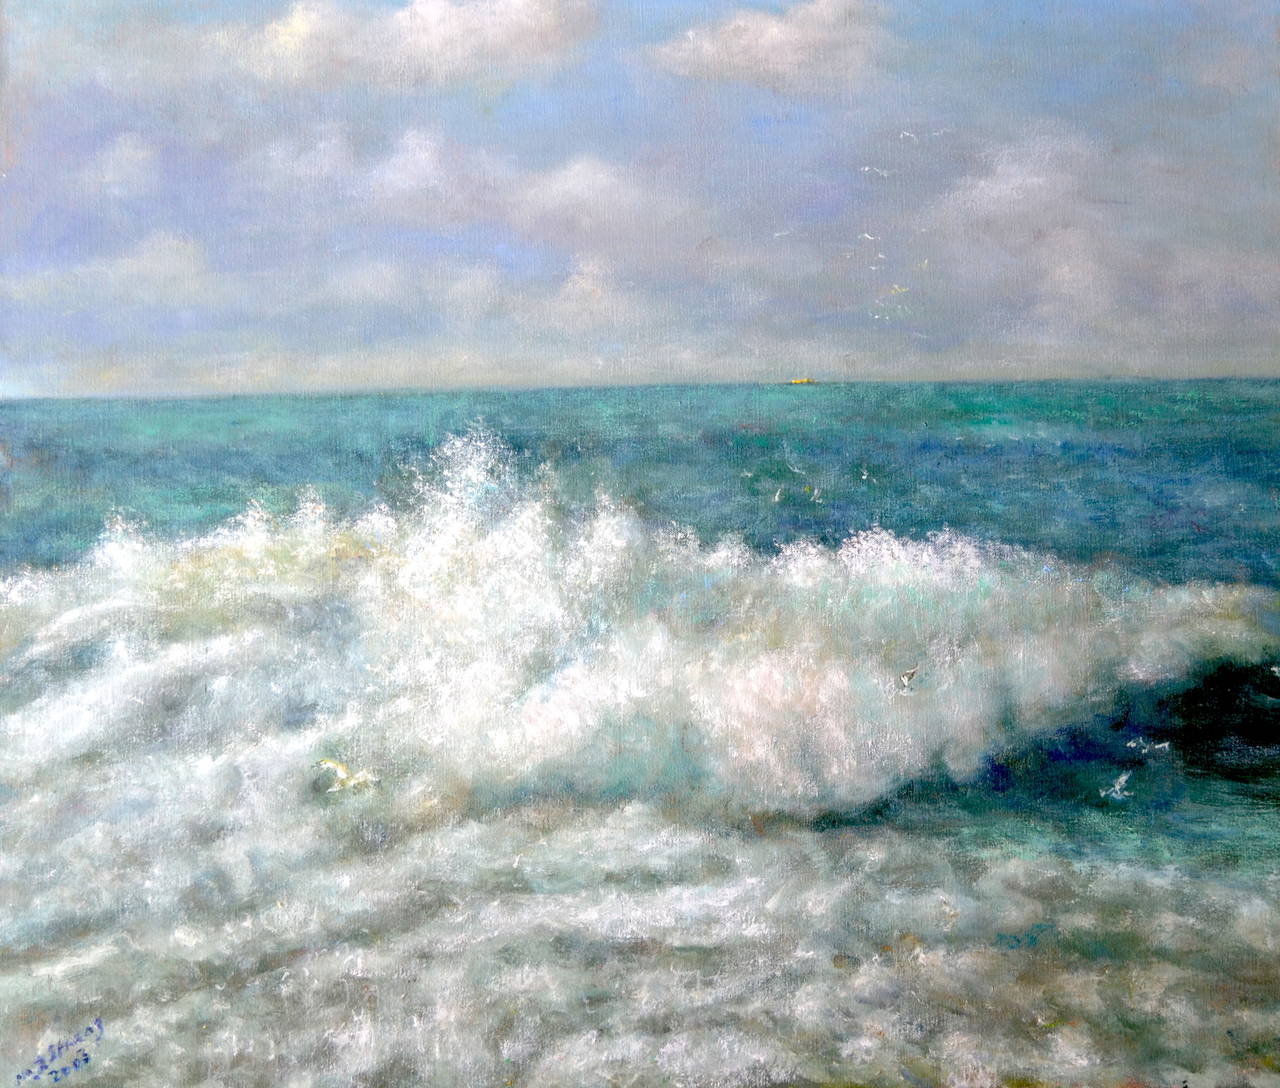 Michael Strang Landscape Painting - The Wave. Contemporary Impressionist Seascape Oil Painting